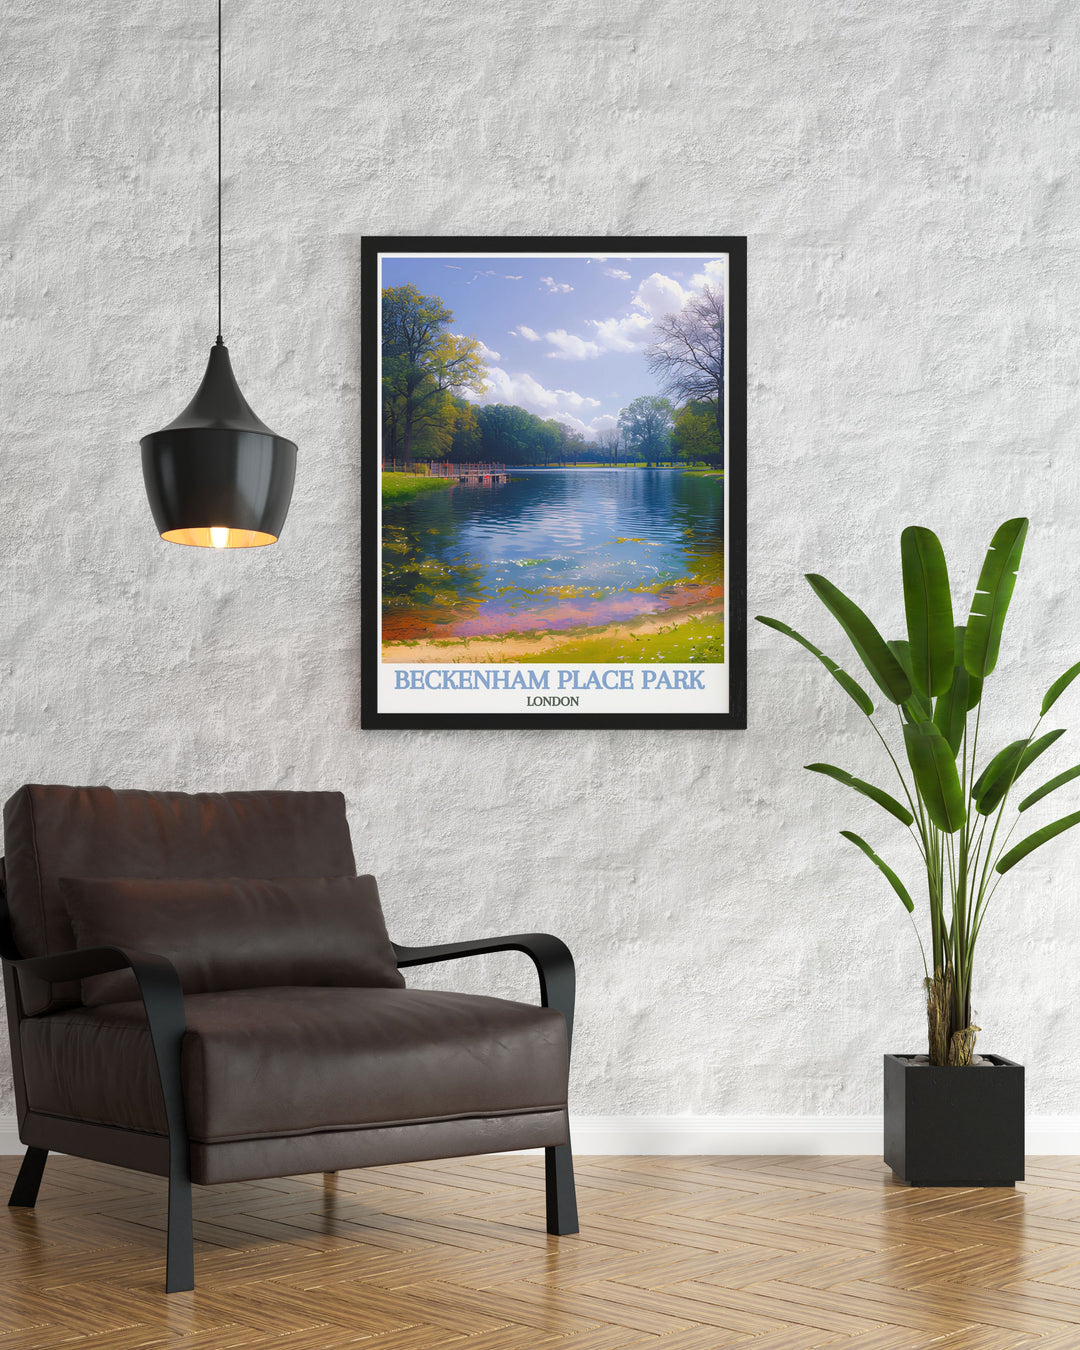 Our Beckenham Place Park Wall Art transports you to the heart of this beloved London park, capturing its lush meadows, historic charm, and serene walking paths. Each piece is designed to offer a timeless addition to any room, perfect for nature enthusiasts and history buffs alike.